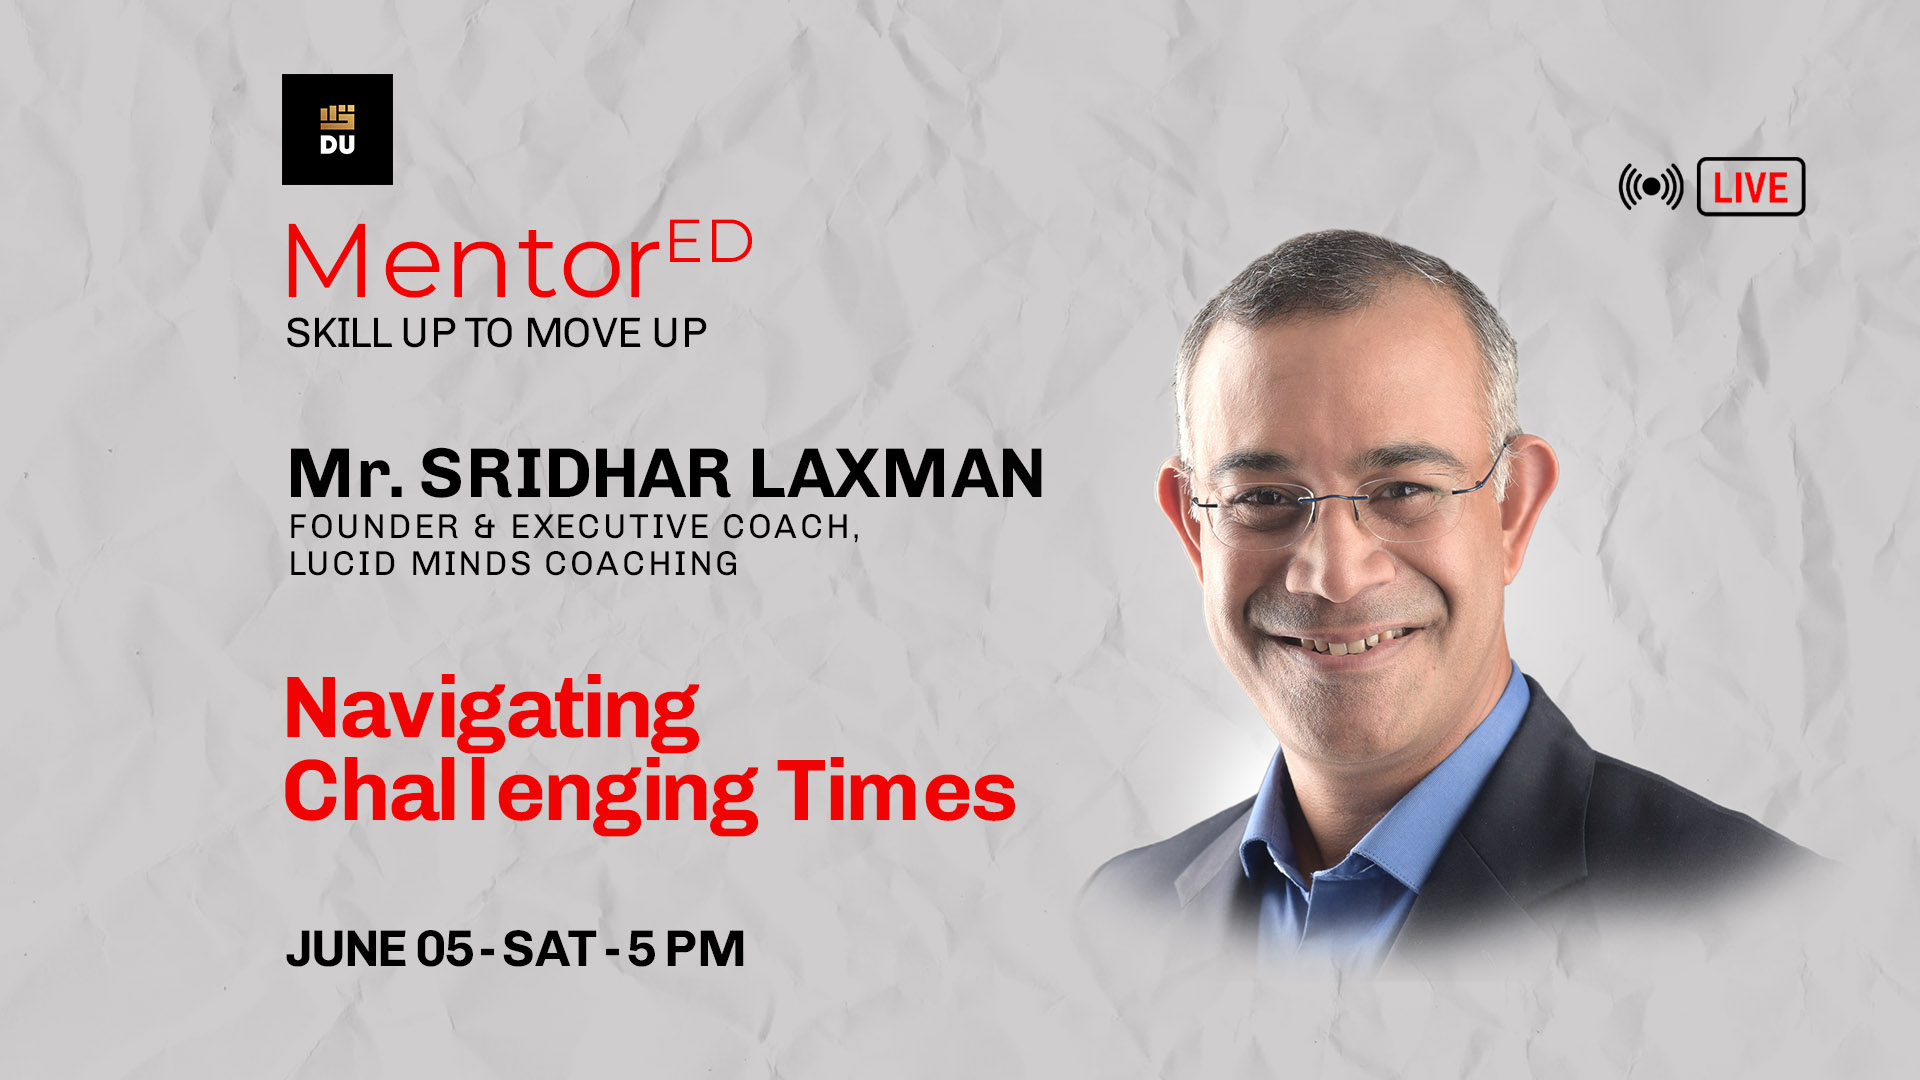 Get MentorEd with Sridhar Laxman